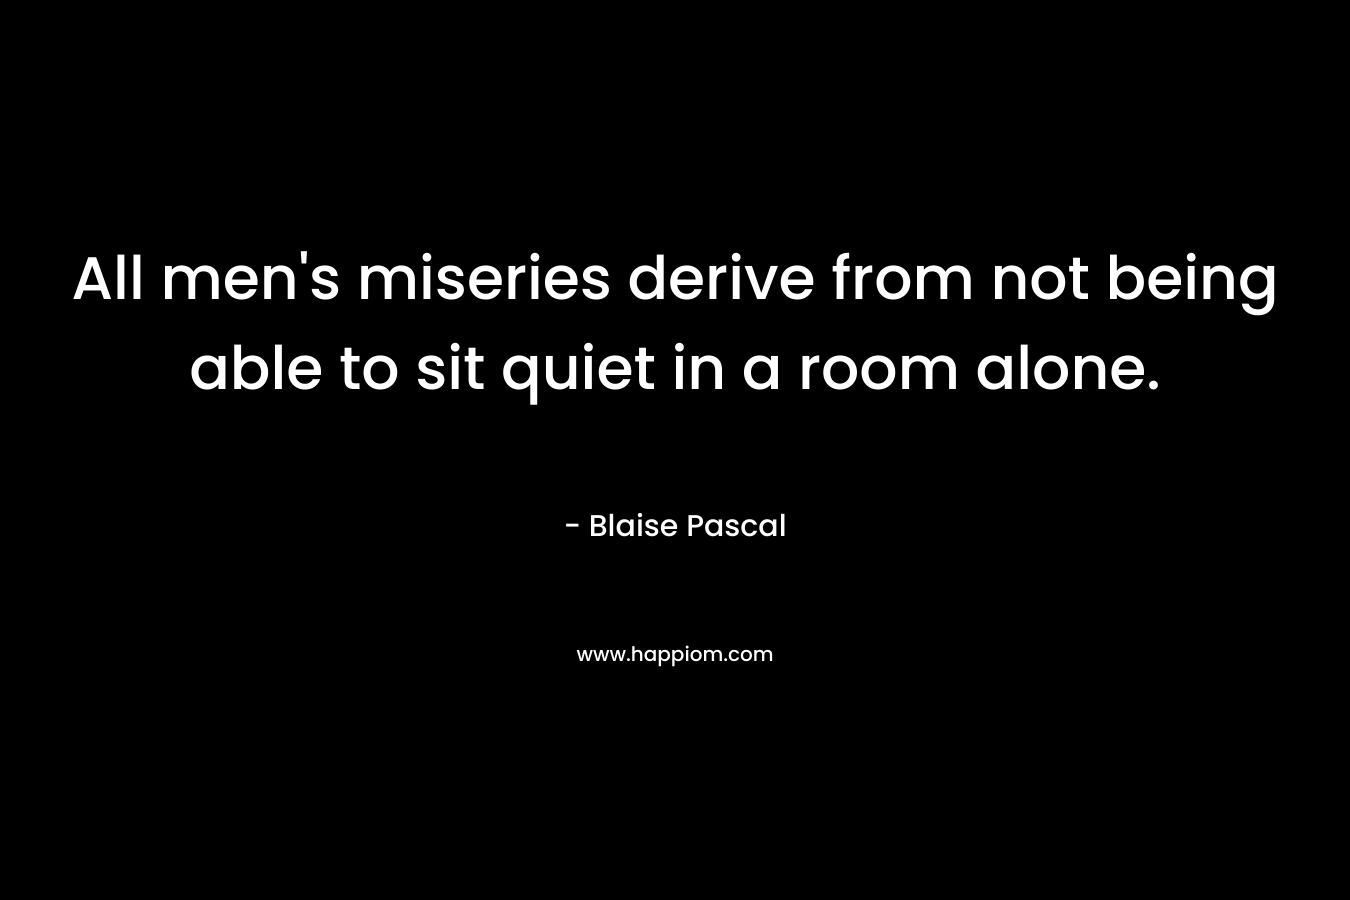 All men’s miseries derive from not being able to sit quiet in a room alone. – Blaise Pascal